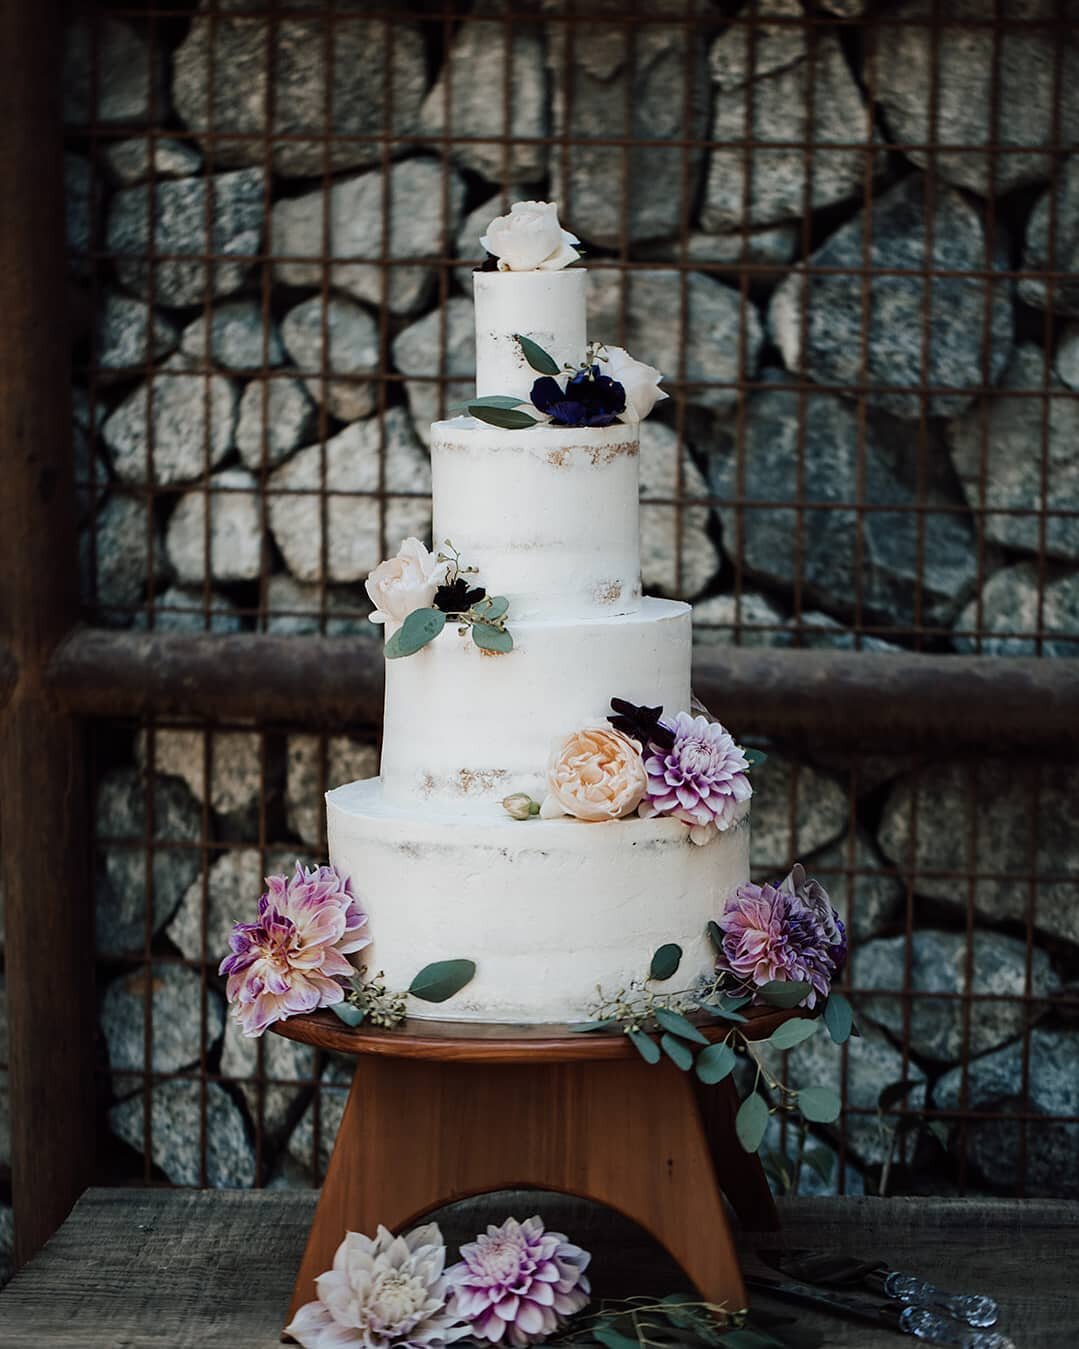 Tuesdays are for cakes. Actually, every day should be for cakes!
​
​Venue | @lomavistagardens
Photo | @​​thedelauras
Video | @joshharneyproductions
Catering | @fireonwheels
Bar | @vanessashare
Florals | @seascapeflowers
DJ | @imsickjames
Live music |